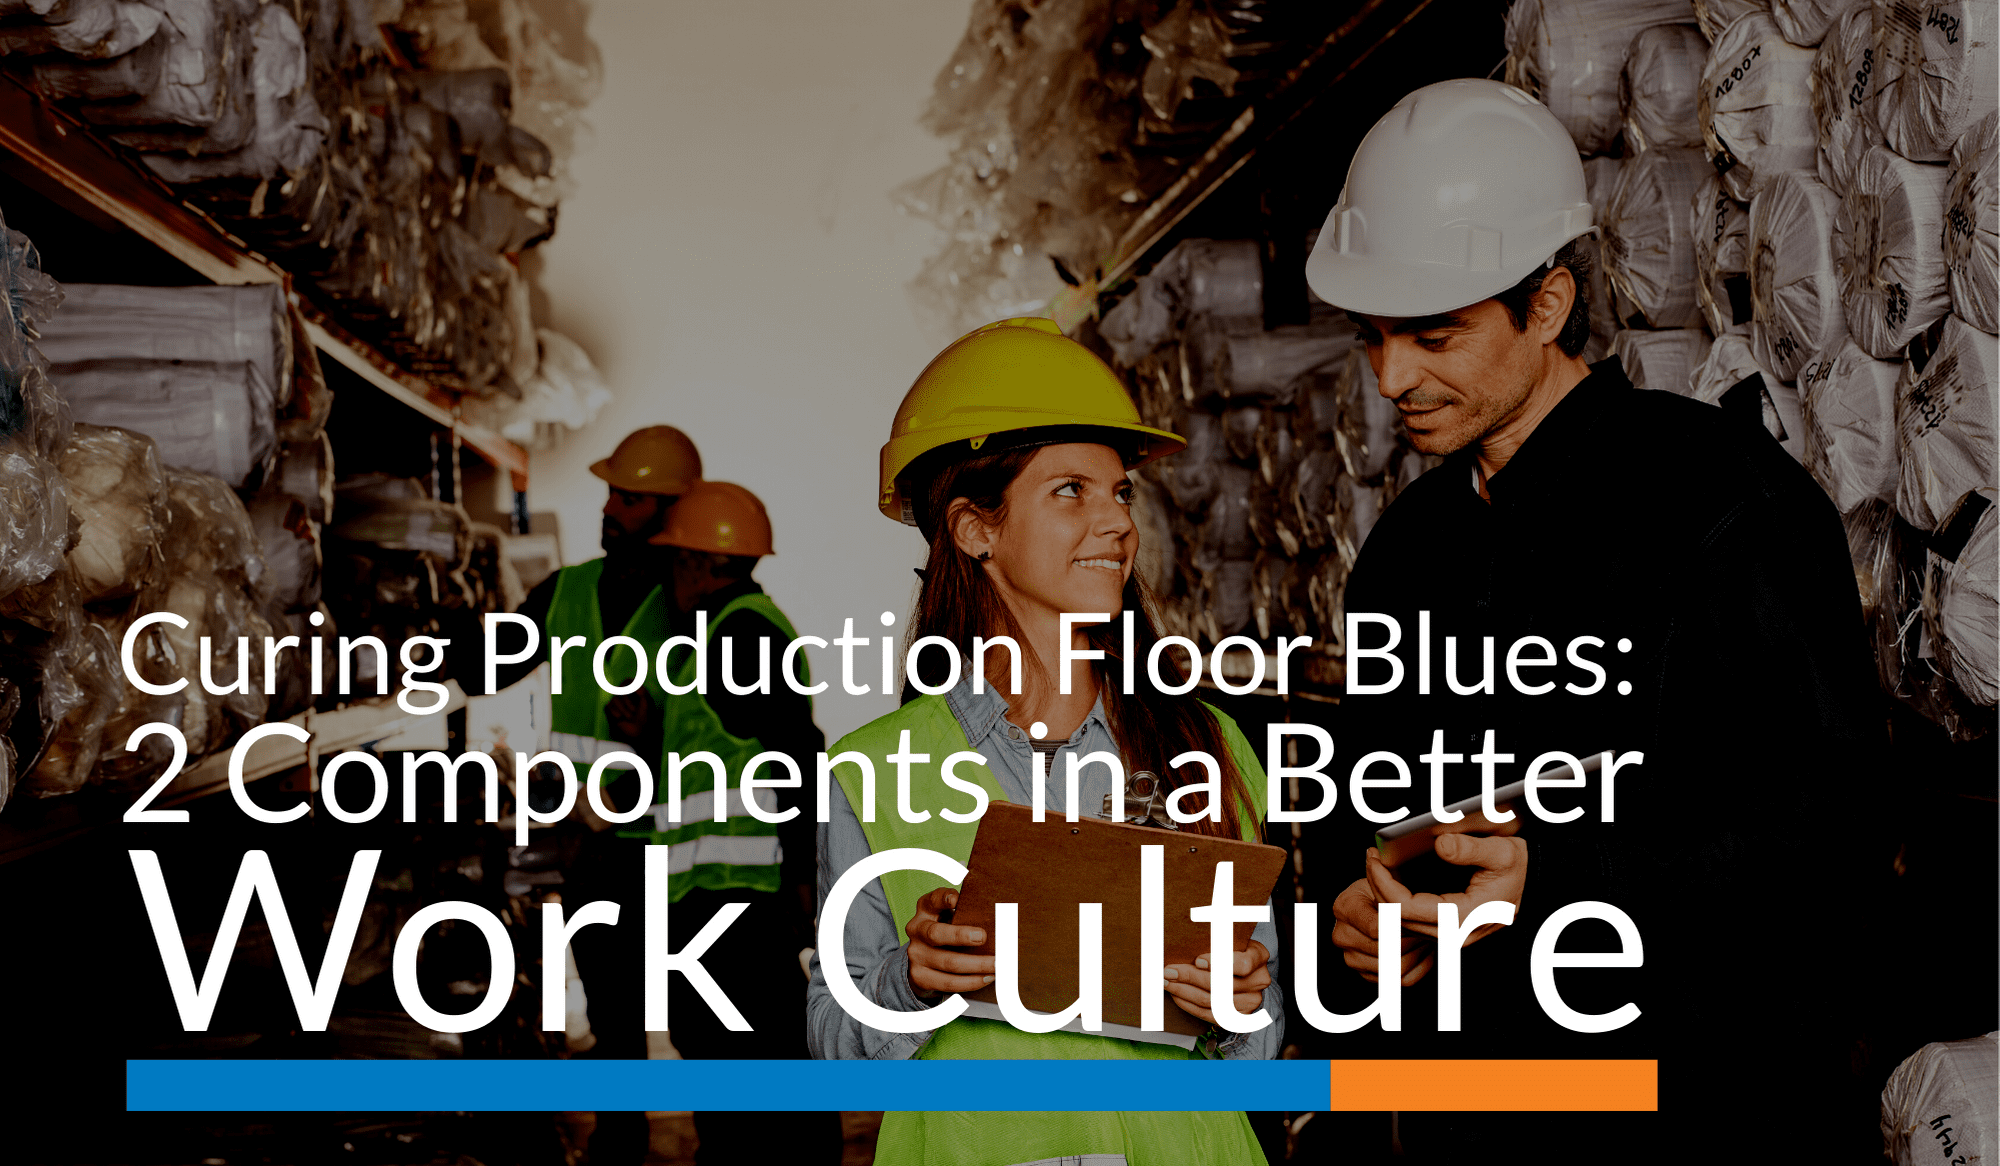 Curing Production Floor Blues: 2 Components in a Better Work Culture.